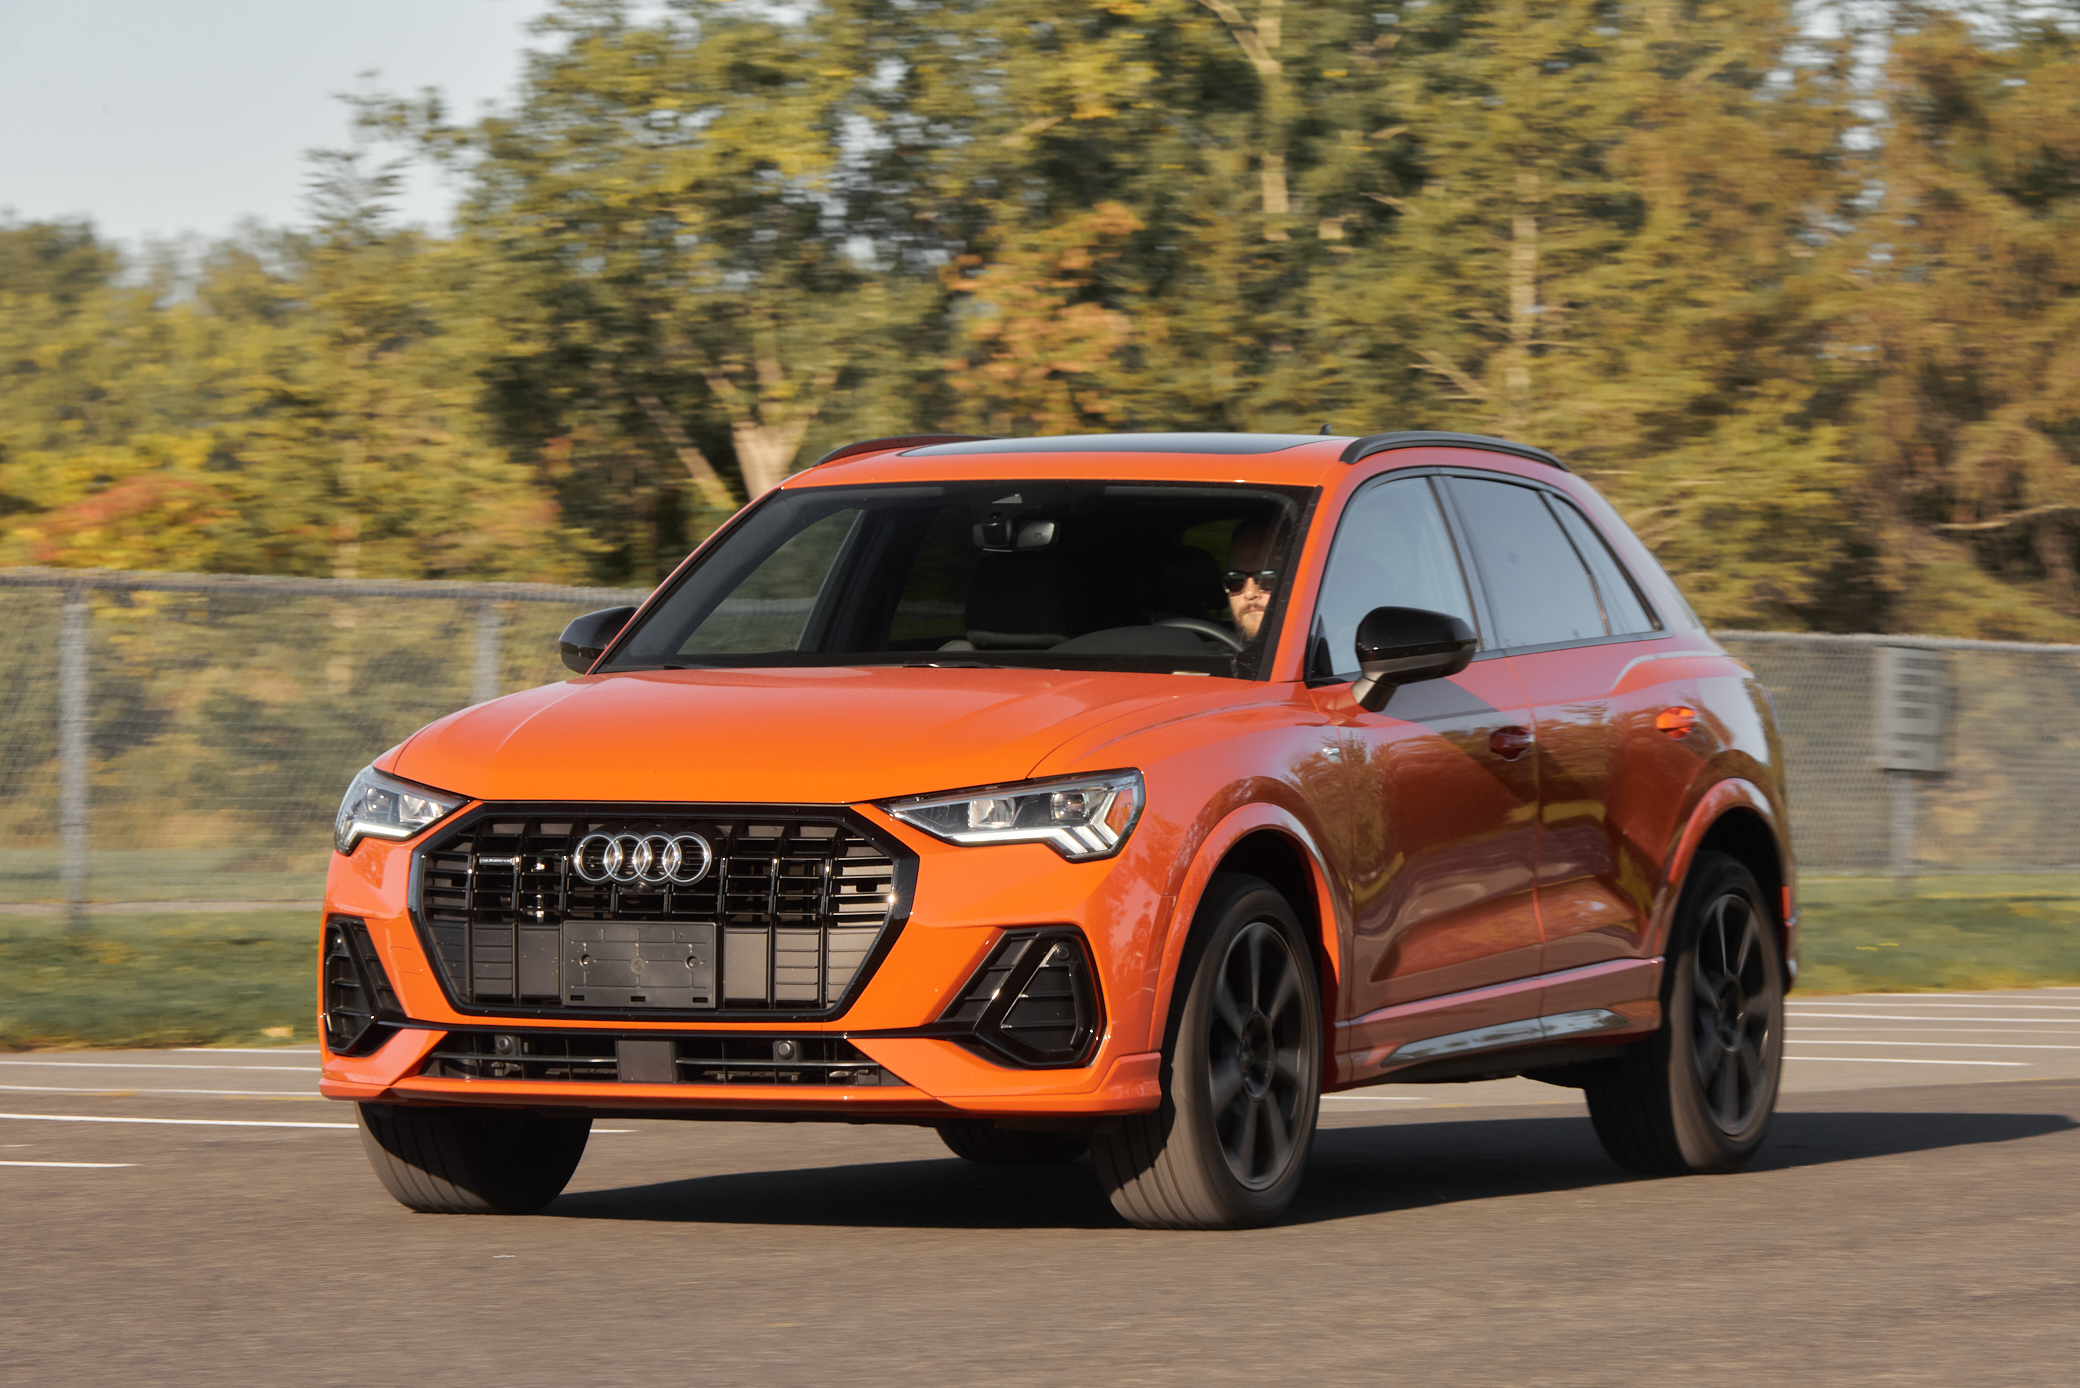 2021 Audi Q3 45 TFSI Isn't The Pimped Up Golf I Was Expecting